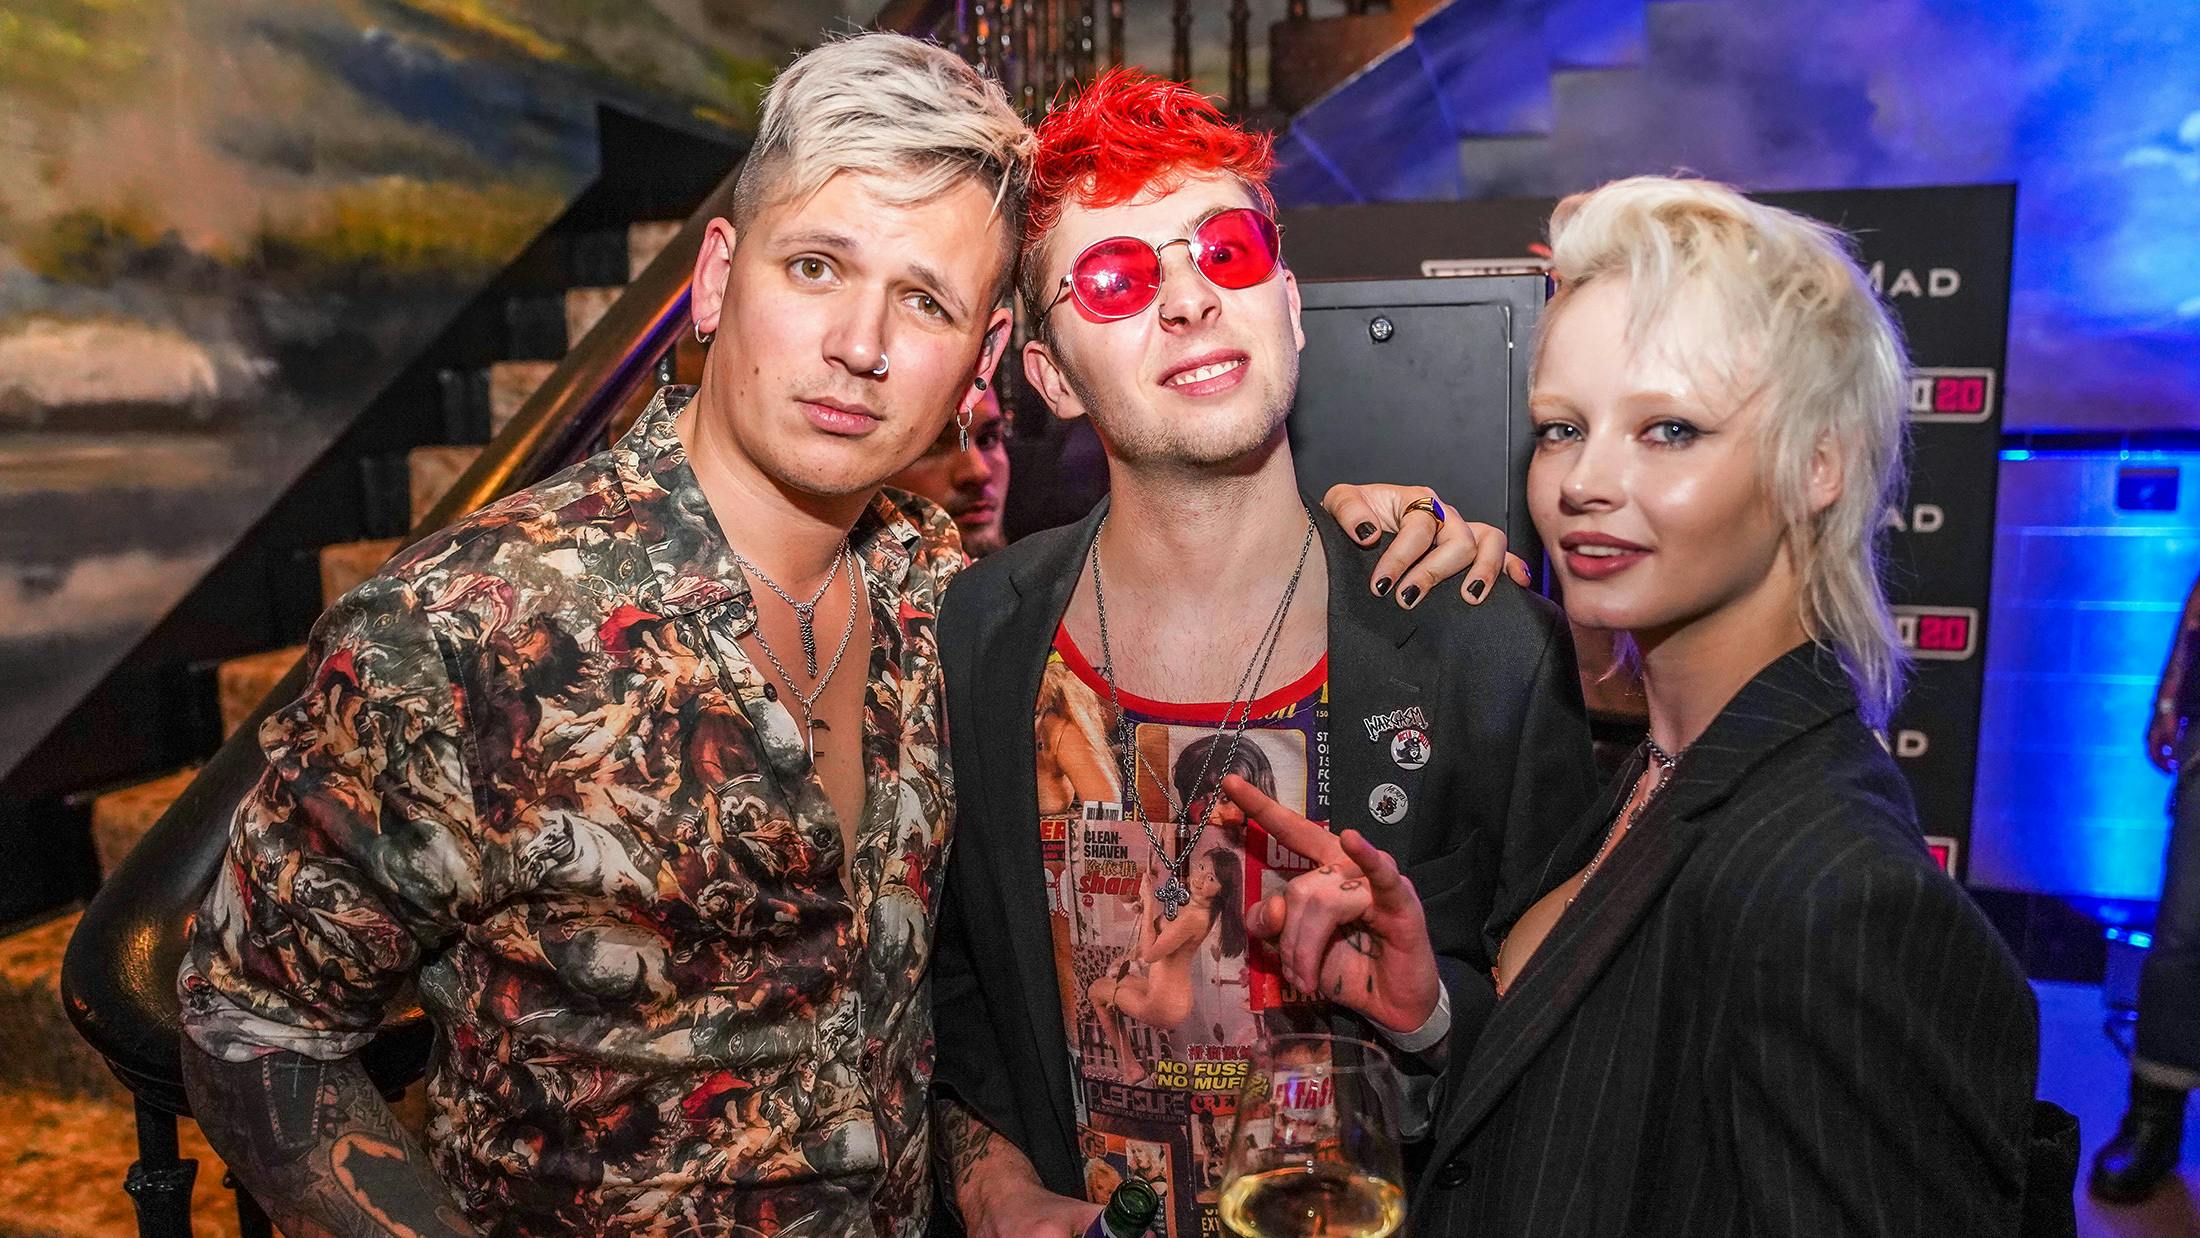 In pictures: Download Festival’s huge launch party in London